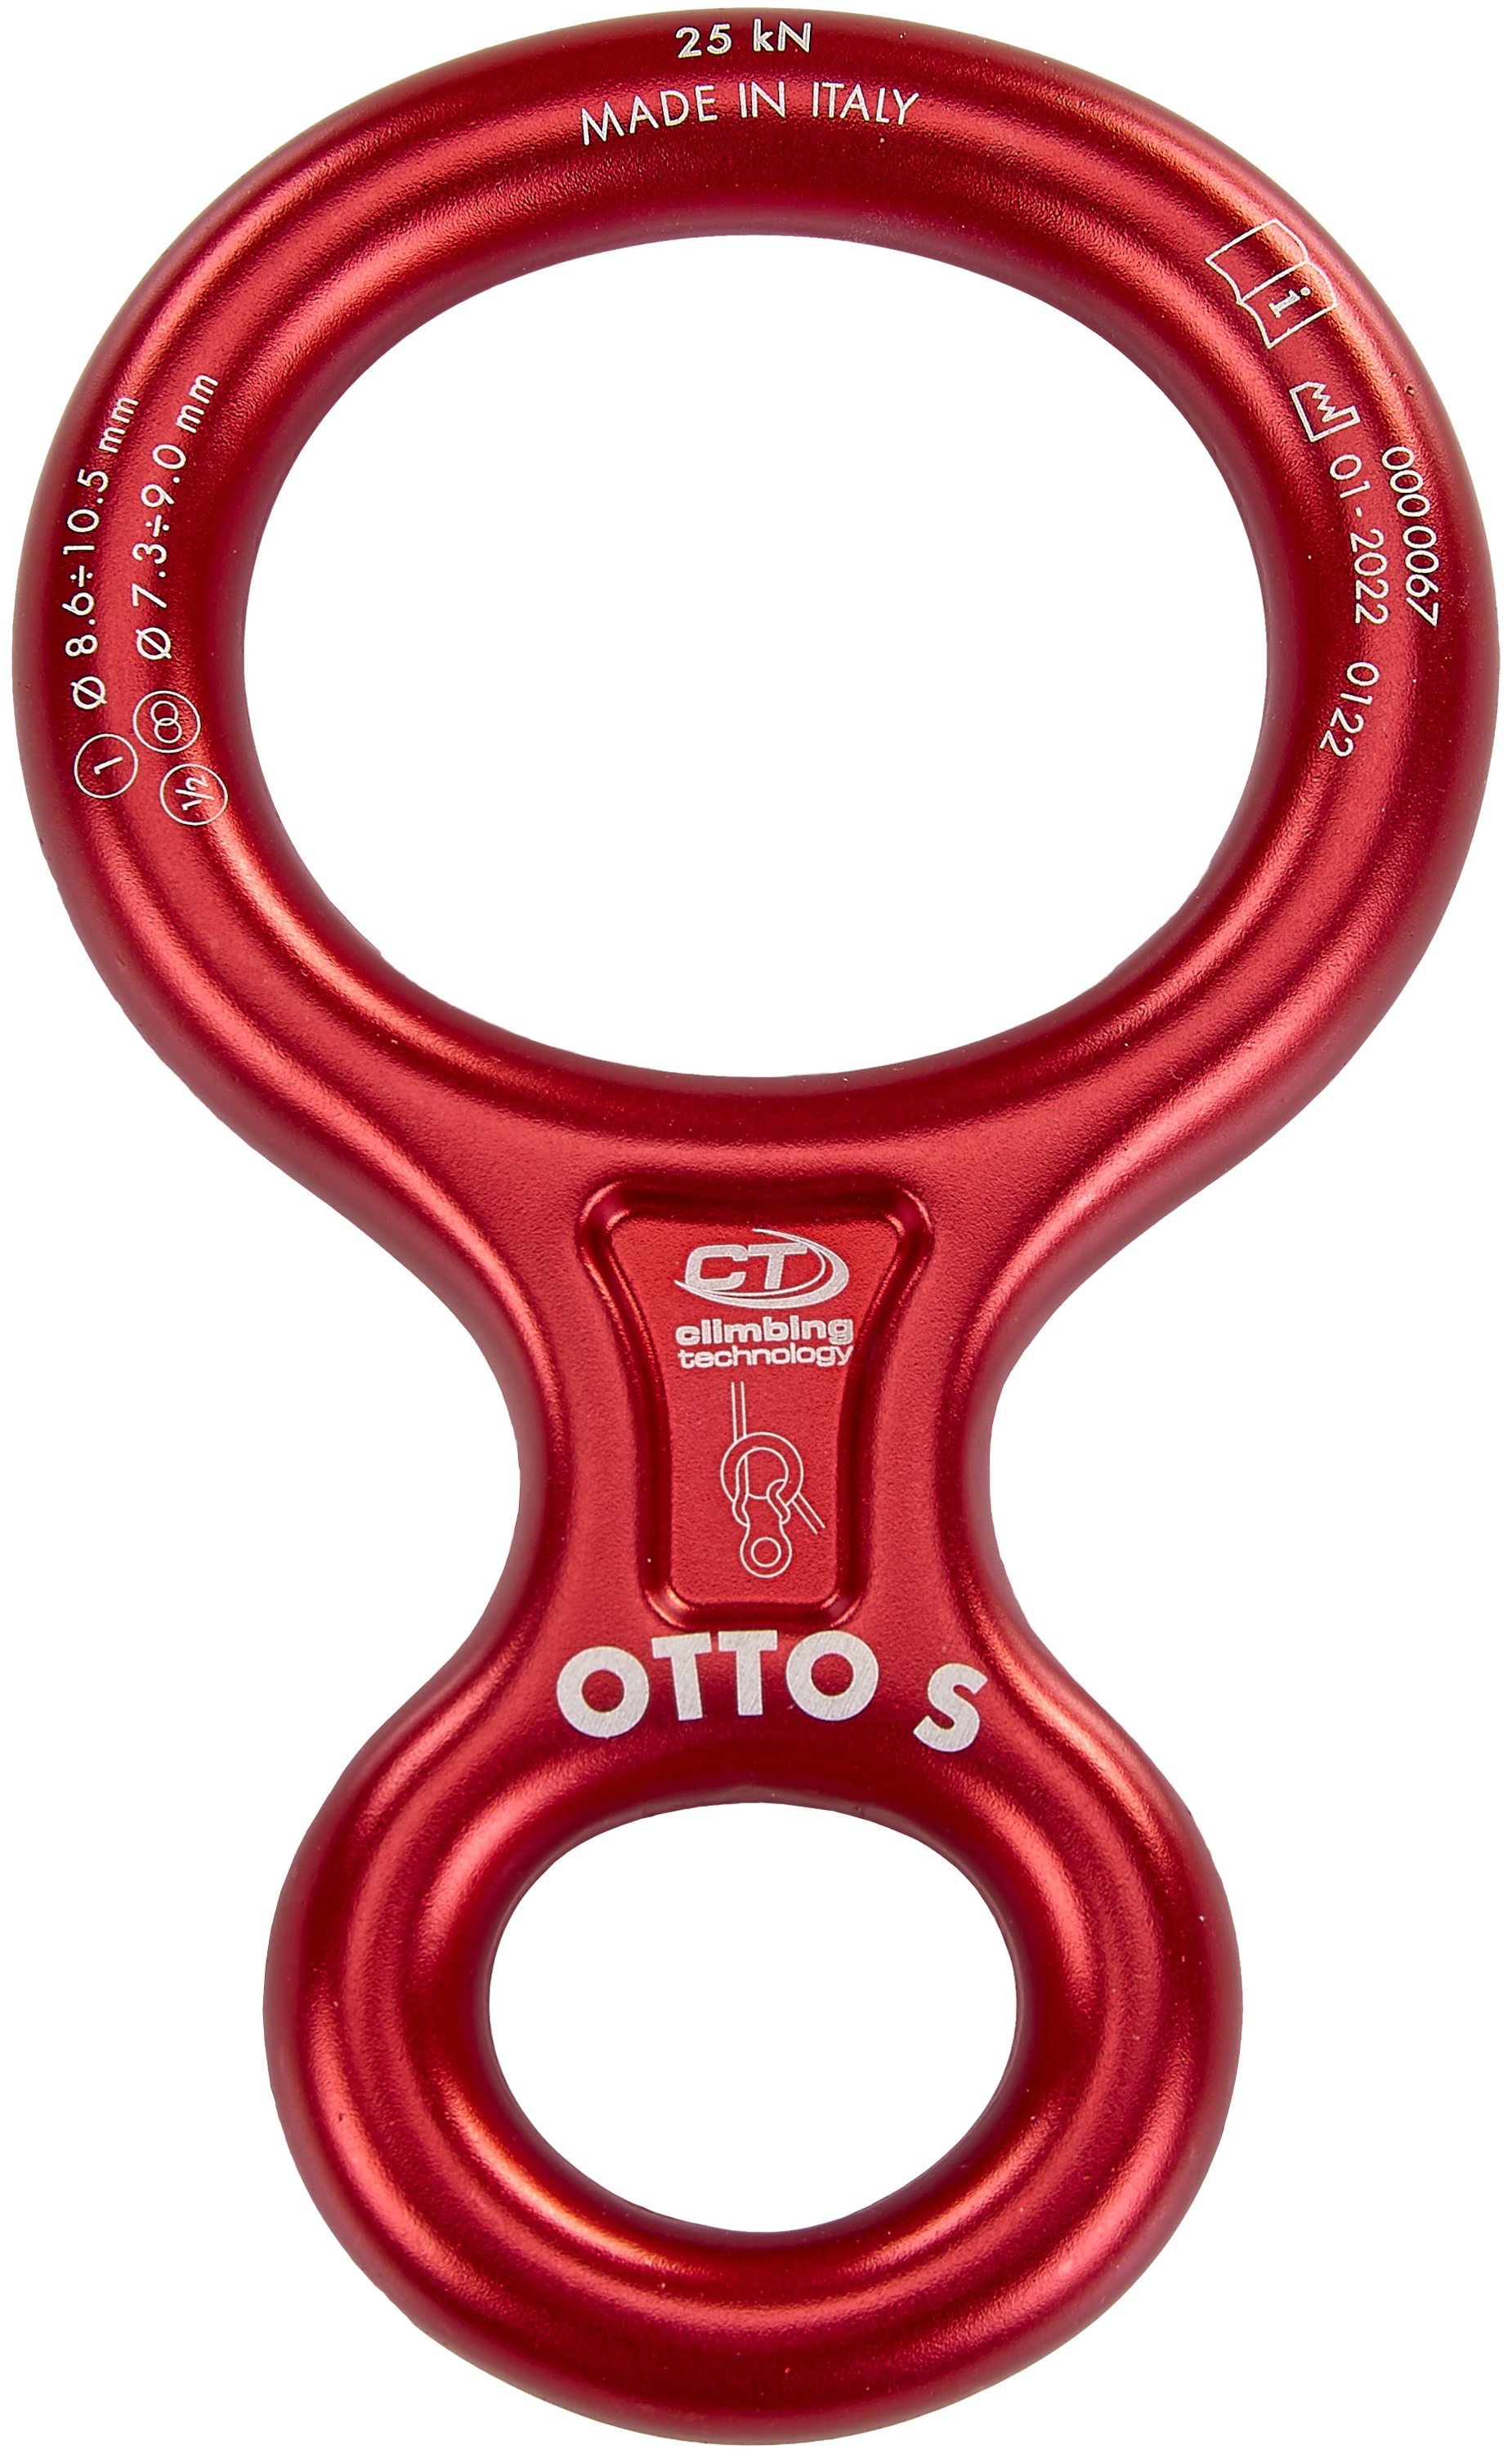 Otto S figure-eight by Climbing Technology